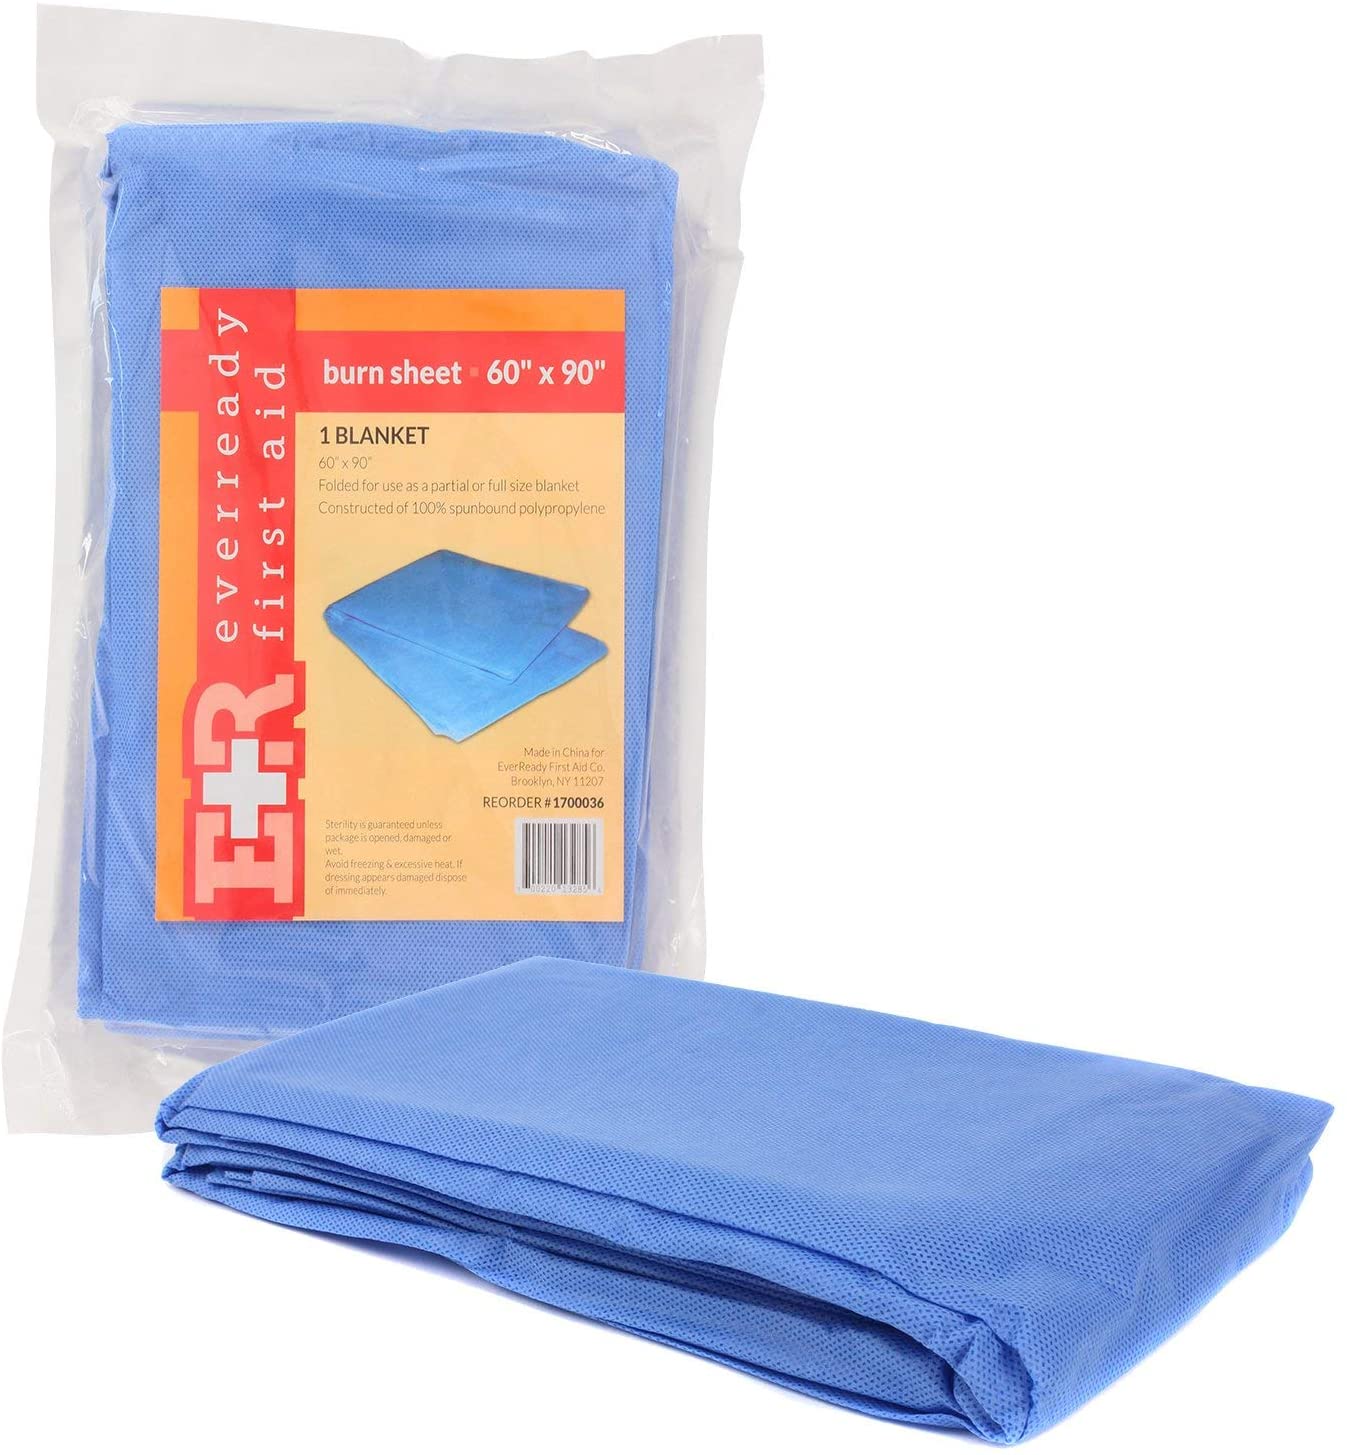 Ever Ready First Aid Sterile Burn Sheet Blanket - 60" x 90"